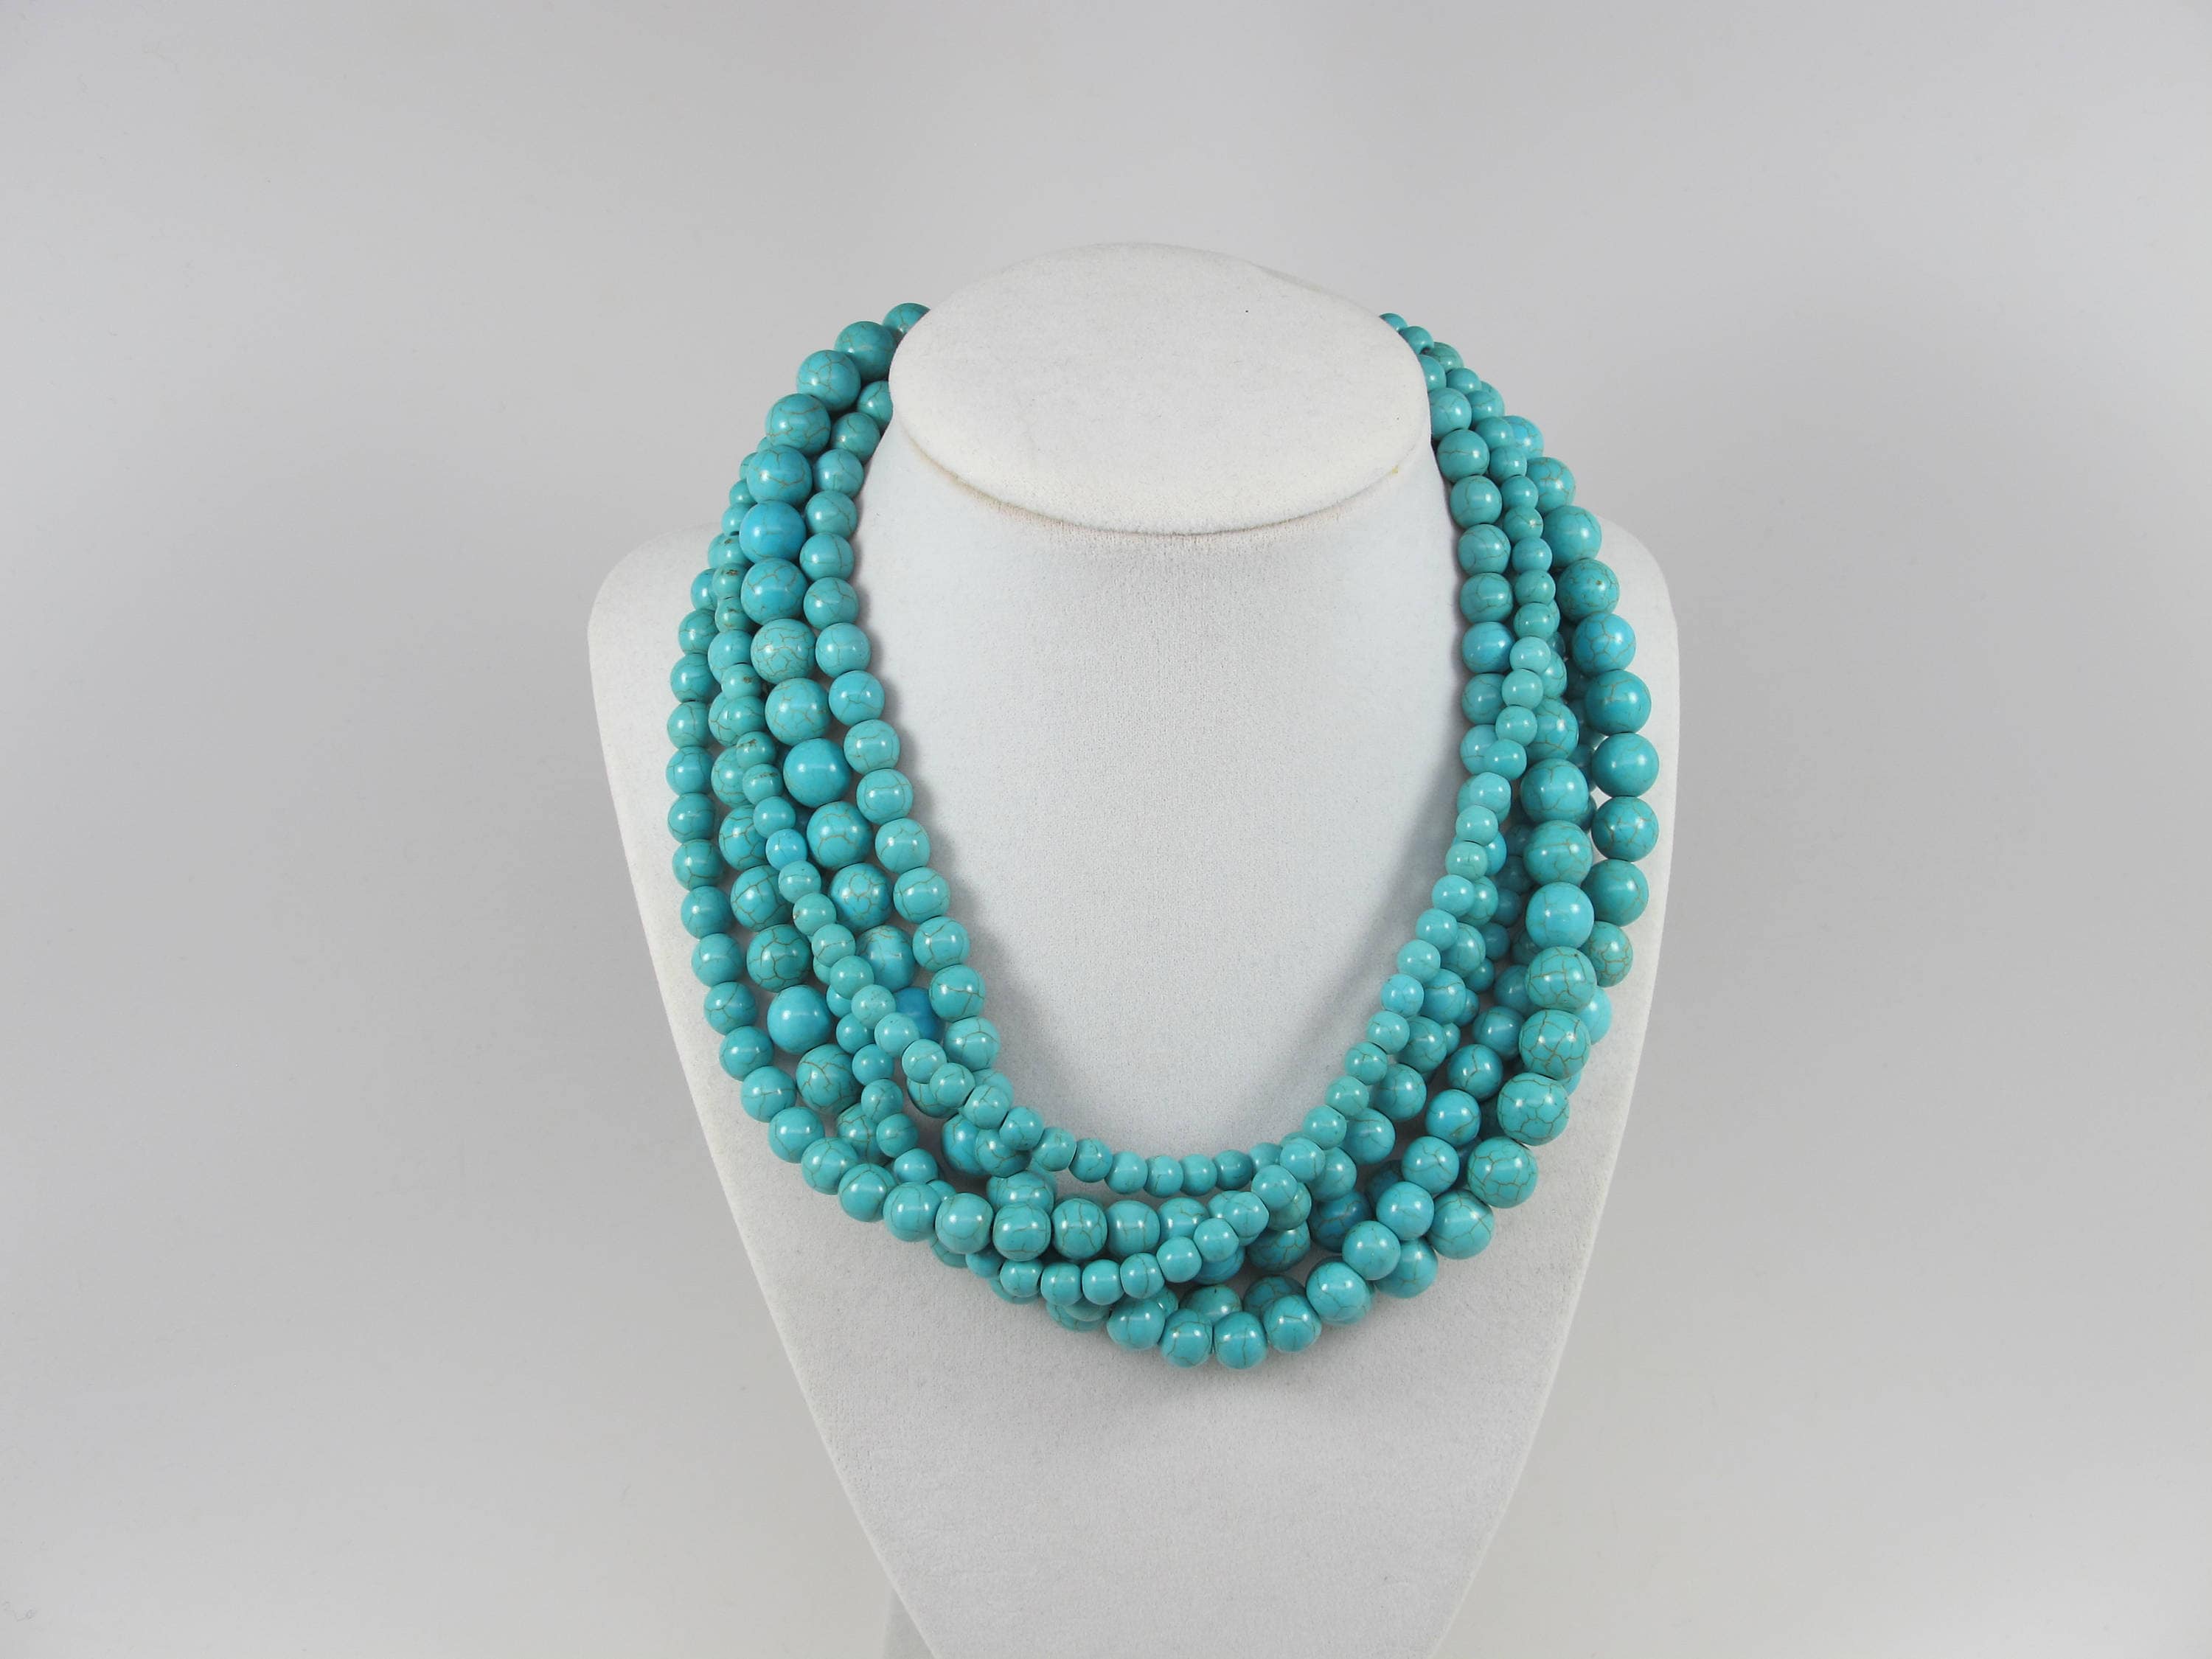 Buy Chunky Turquoise Necklace, Multi Strand Statement Necklace, Statement  Turquoise Jewelry, Big Turquoise Stone Beads Online in India - Etsy